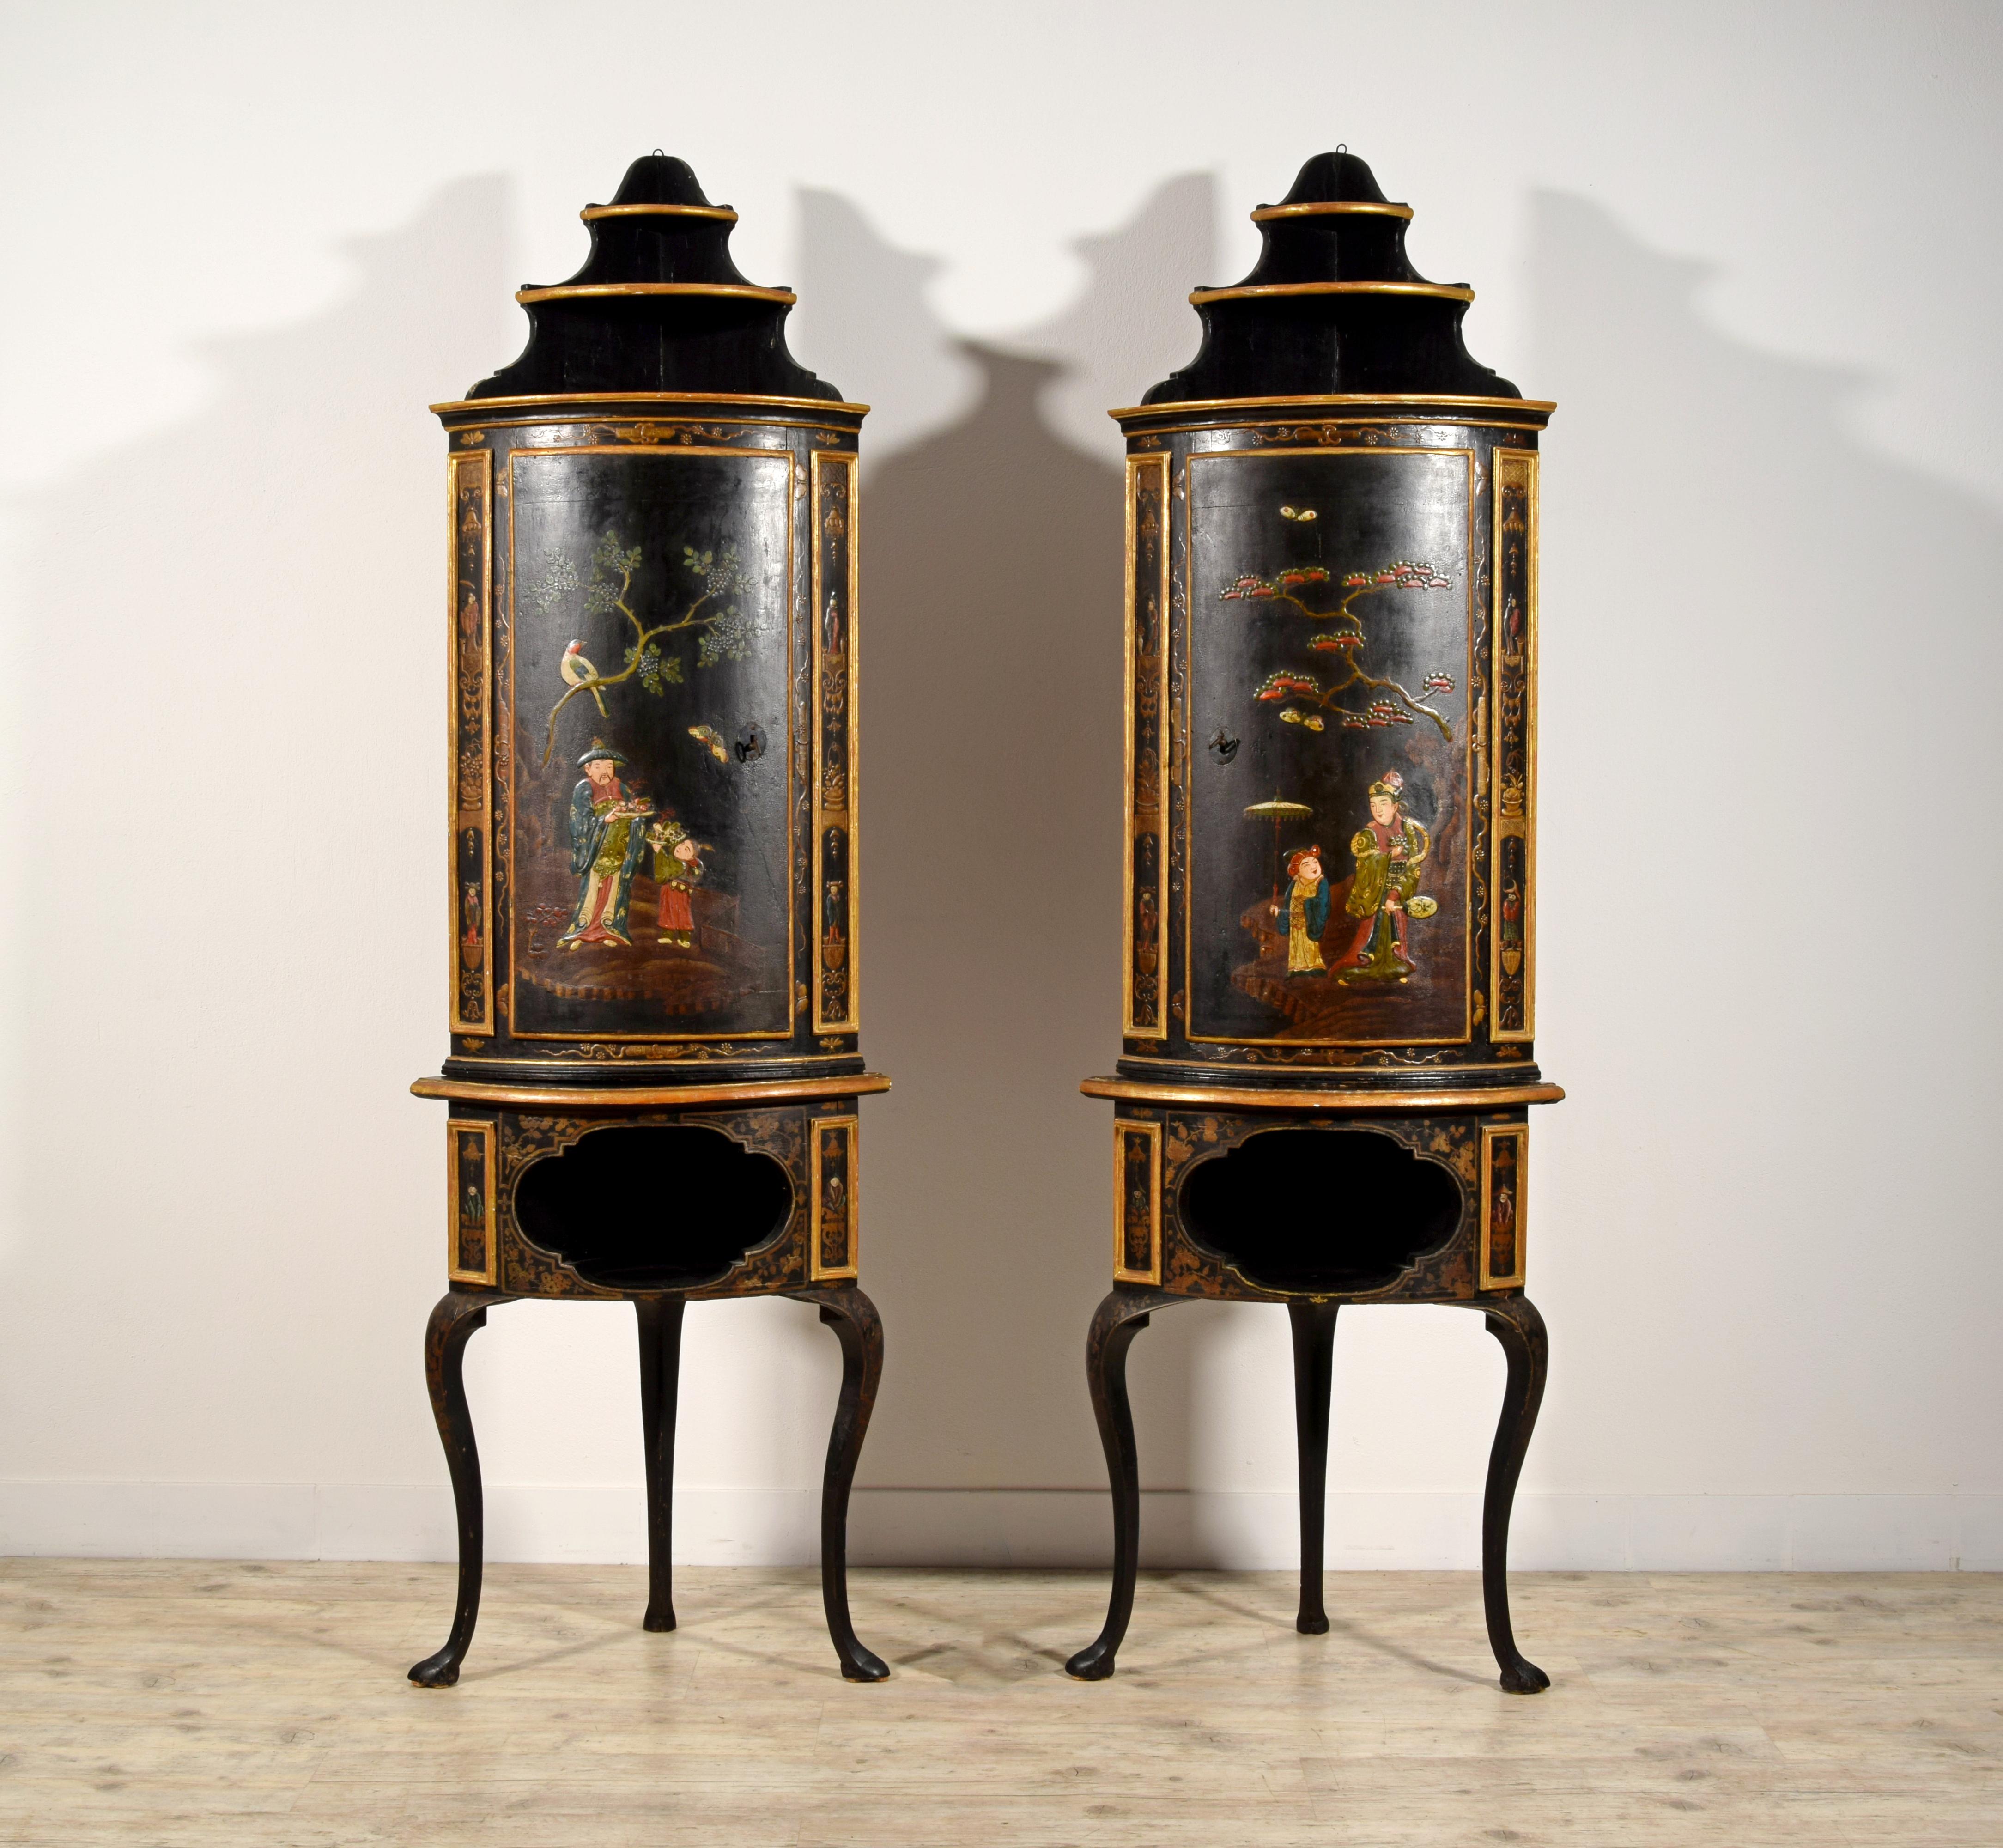 18th Century, Pair of Italian Rococo Chinoiserie Lacquered Wood Corner Cabinets 
This pair of corner cabinets was made in Piedmont, Italy, around the middle of the eighteenth century according to the taste of the baroque.
The structure is in poplar